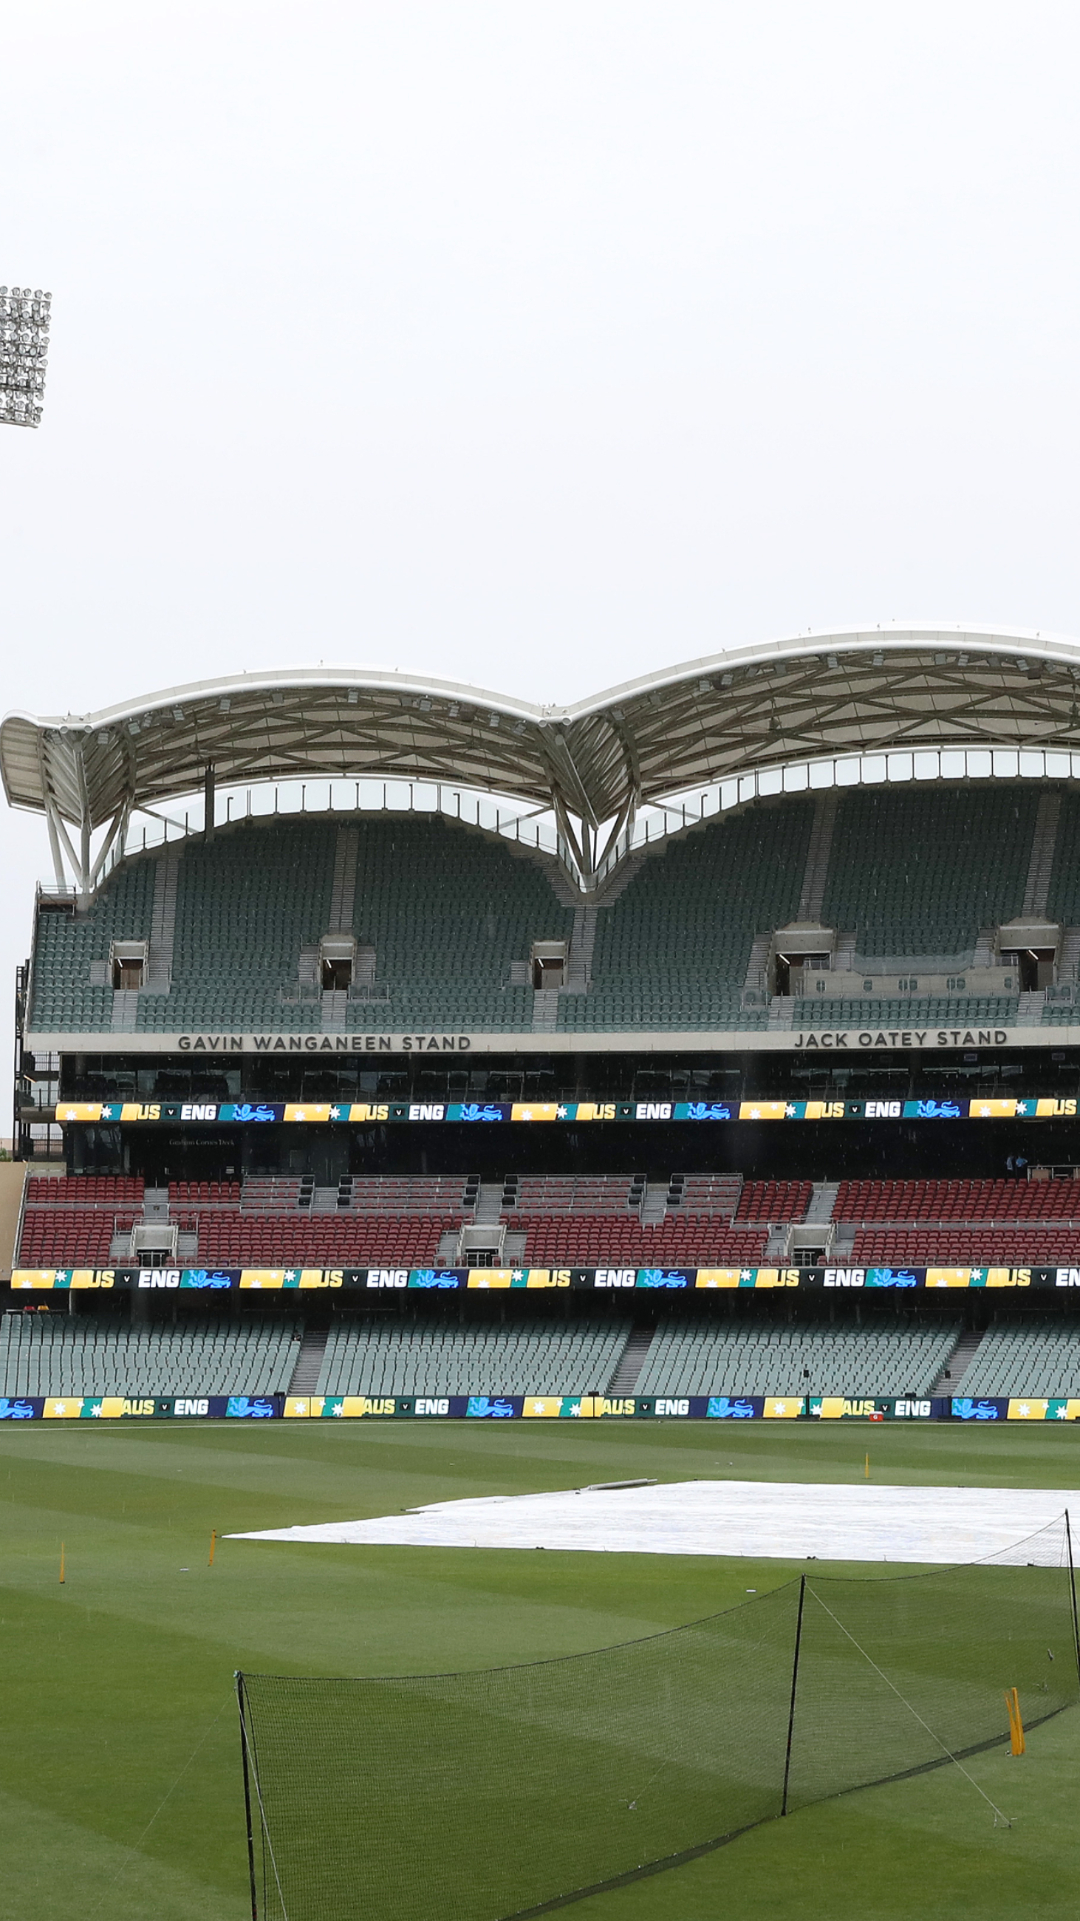 T20 World Cup 2022: From Adelaide Oval to Gabba, here's the list of 7 venues for the mega-event